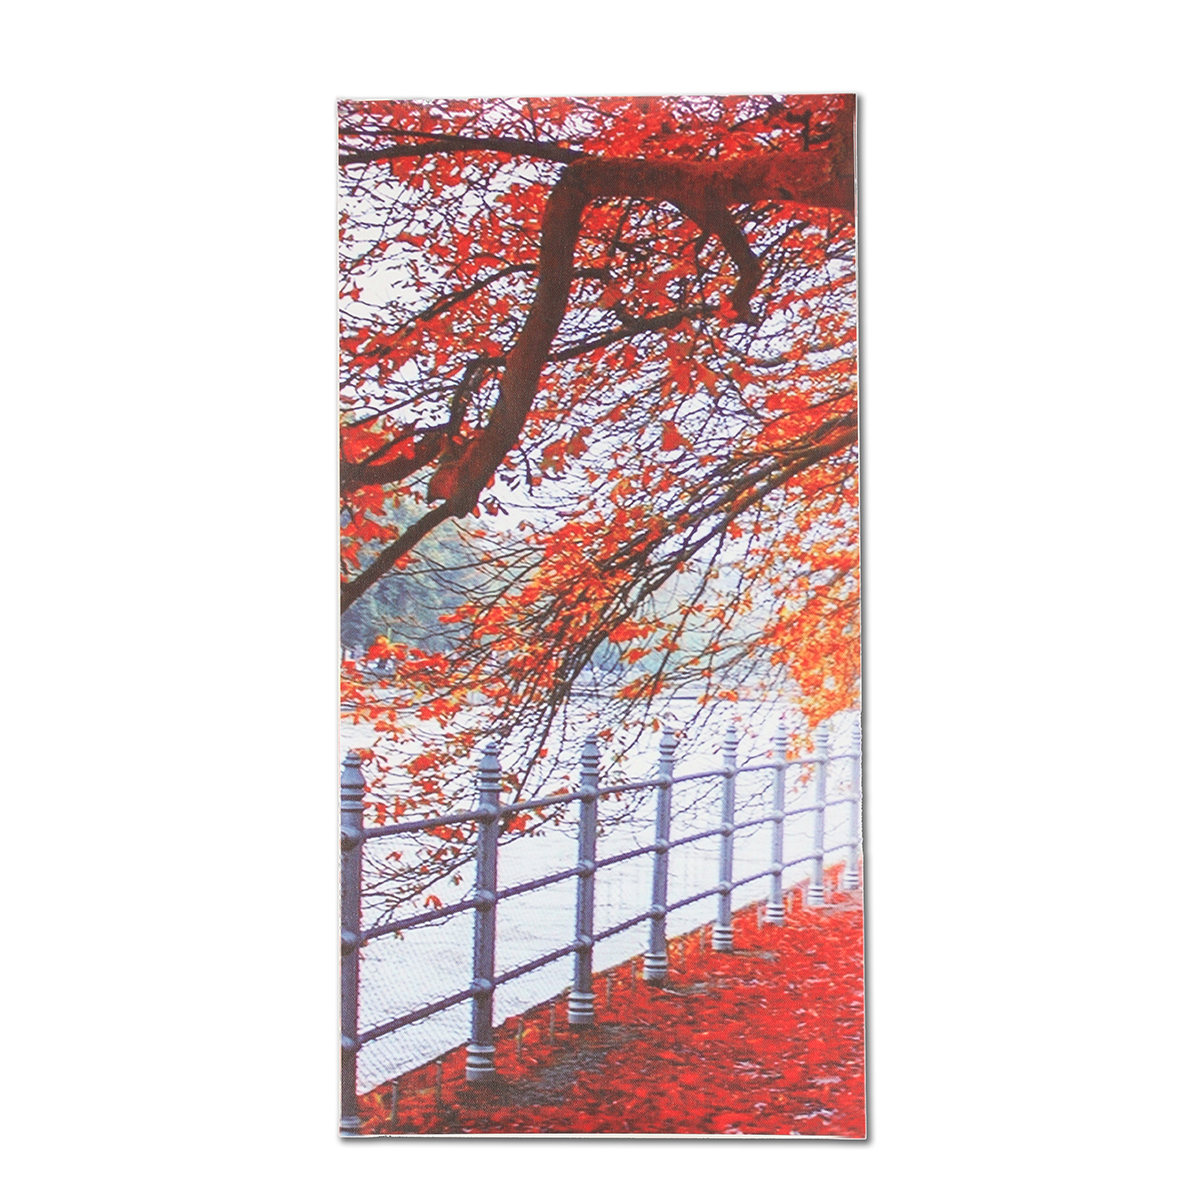 5Pcs-Red-Falling-Leaves-Canvas-Painting-Autumn-Tree-Wall-Decorative-Print-Art-Pictures-Unframed-Wall-1809936-8